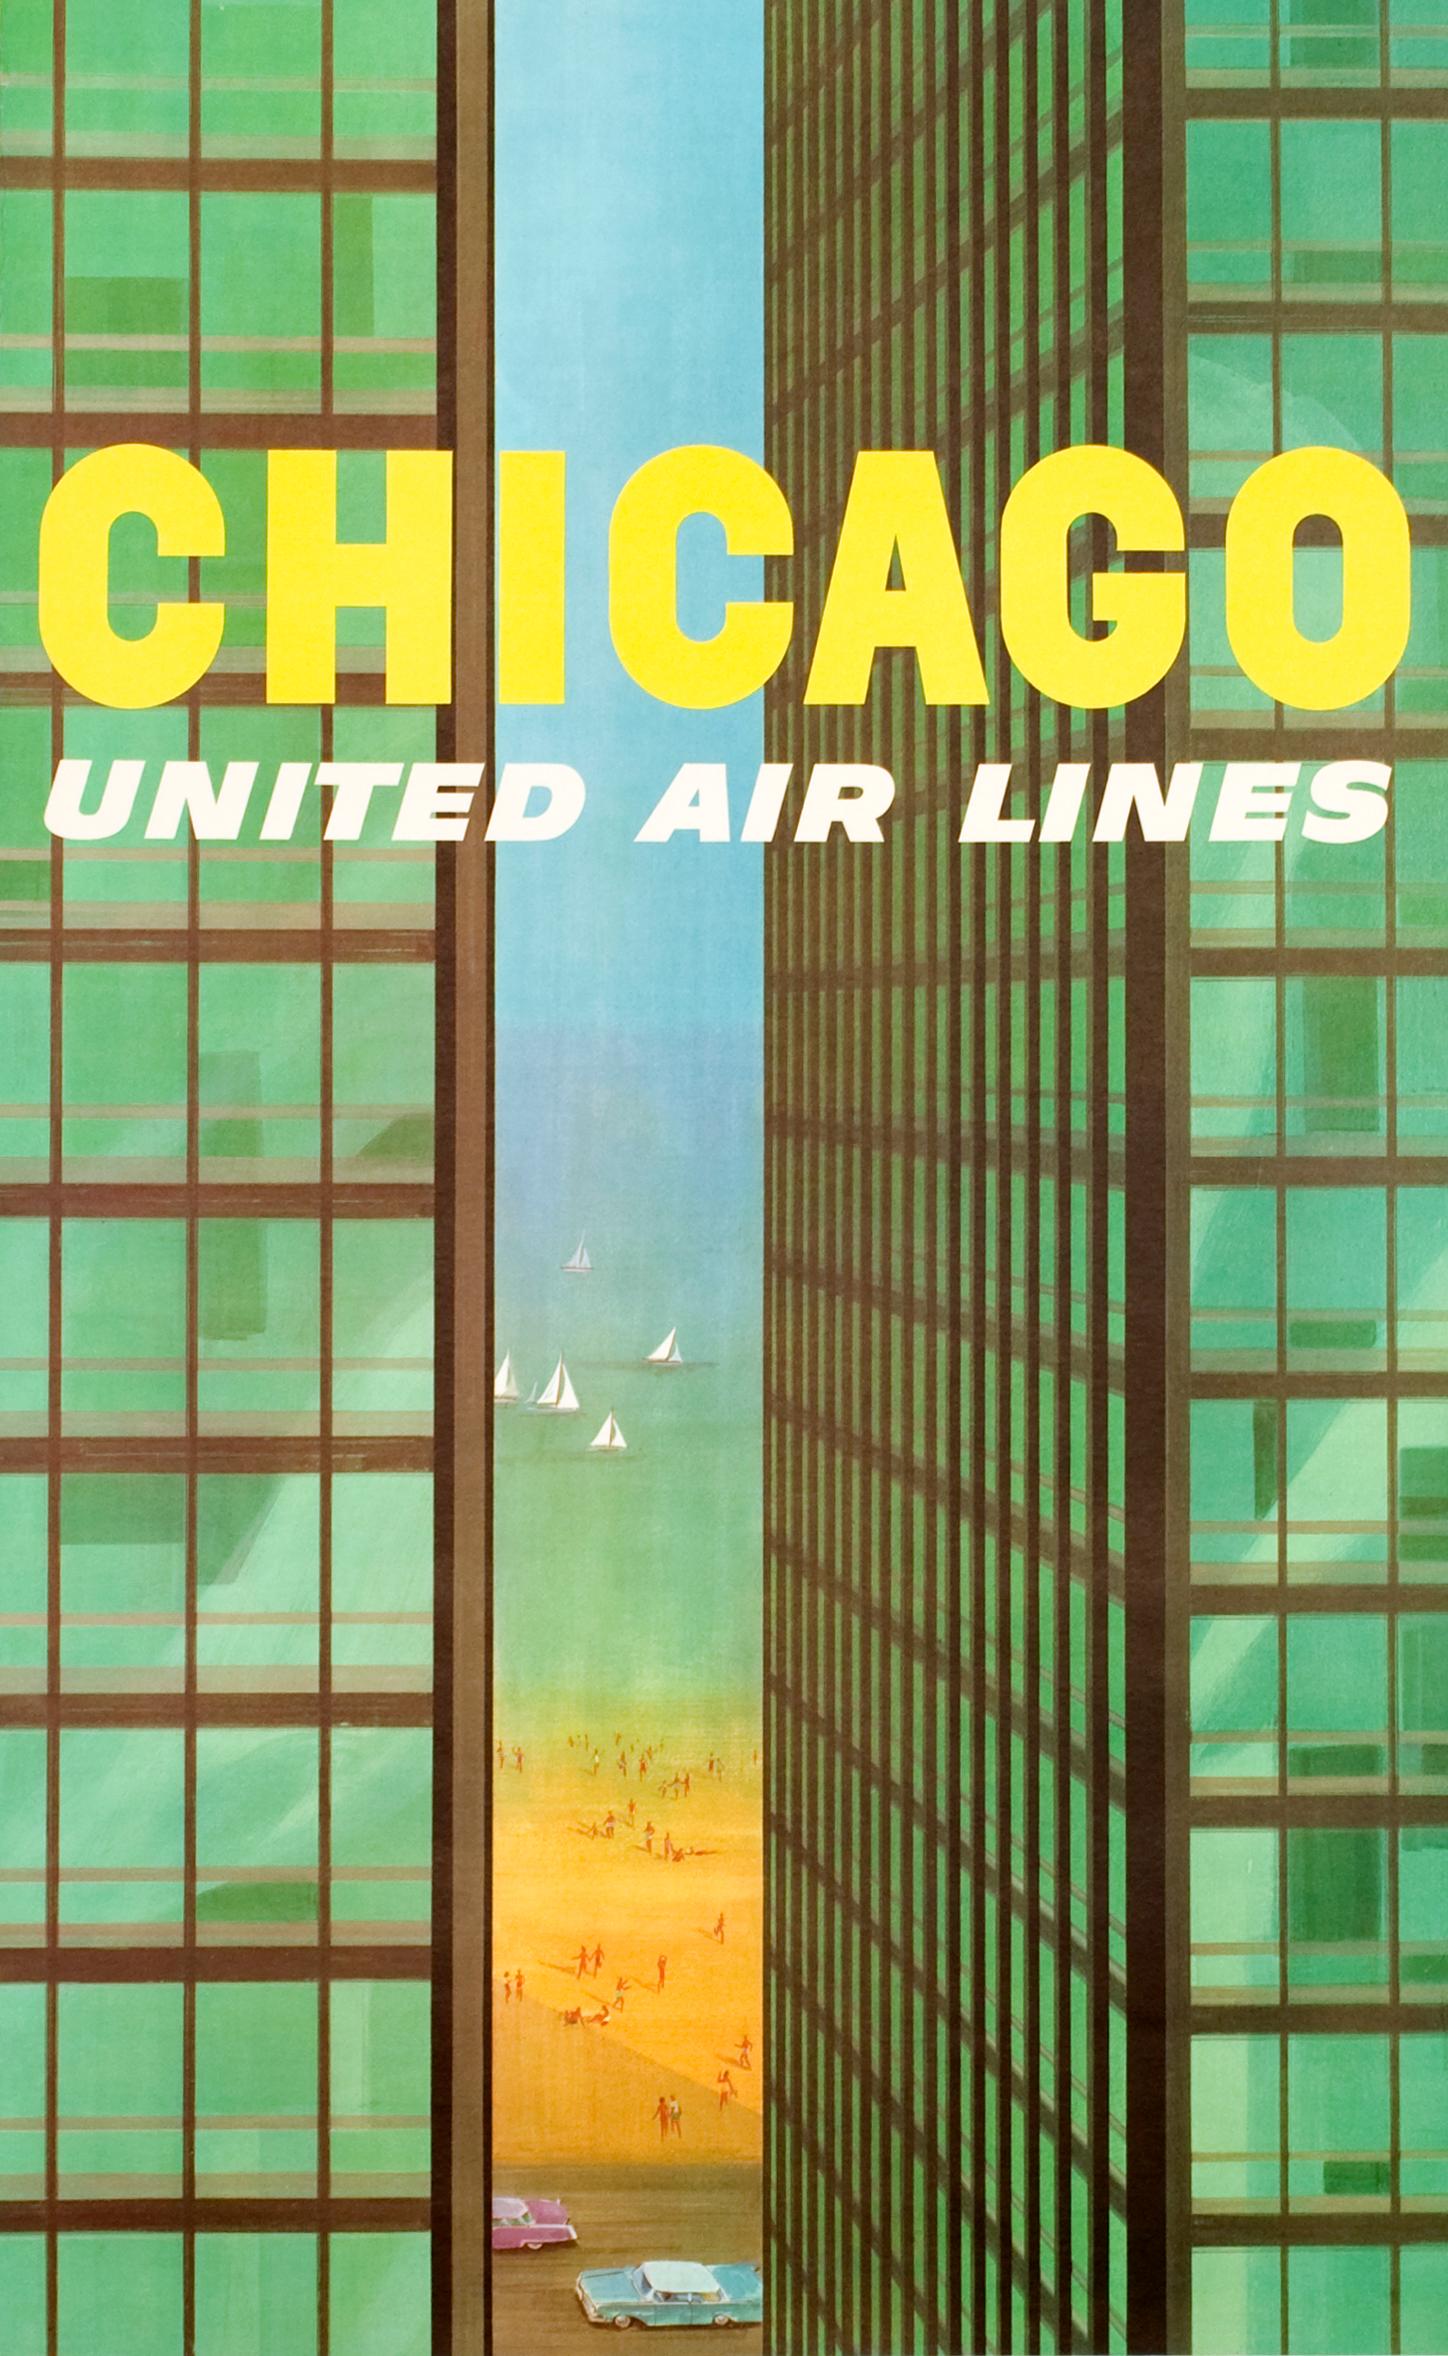 "Chicago - United Air Lines (Mies Building)" Original Vintage Travel Poster - Print by Stan Galli